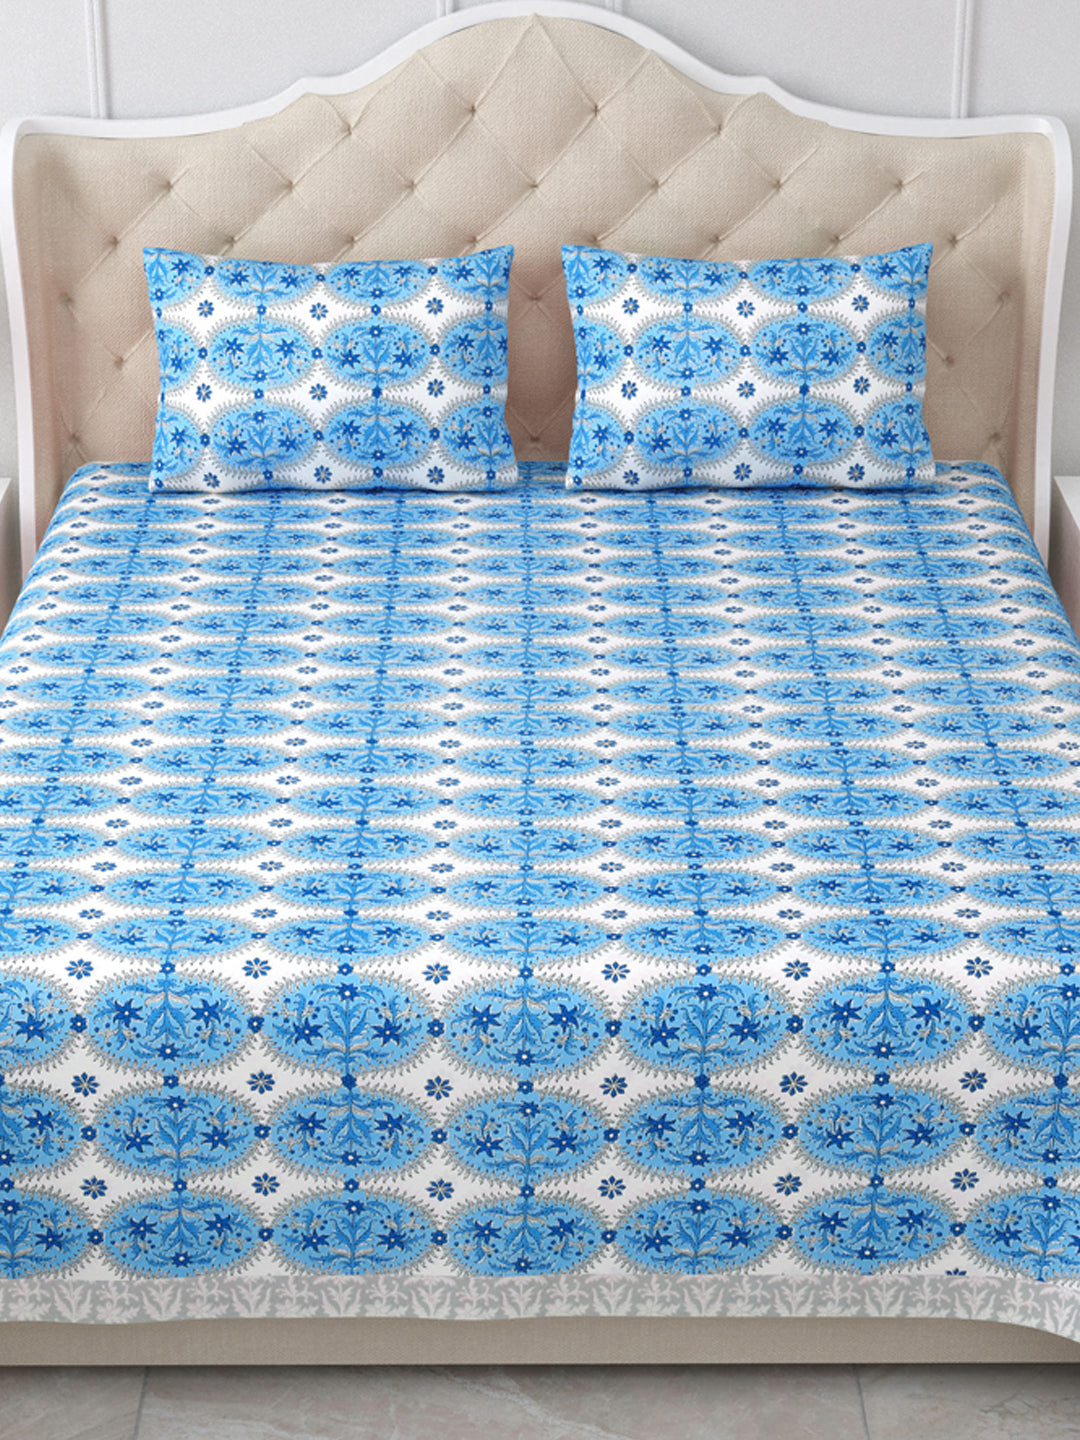 Jaipur Blue Pottery Mosaic Cotton Double Bedsheet with 2 Pillow Covers